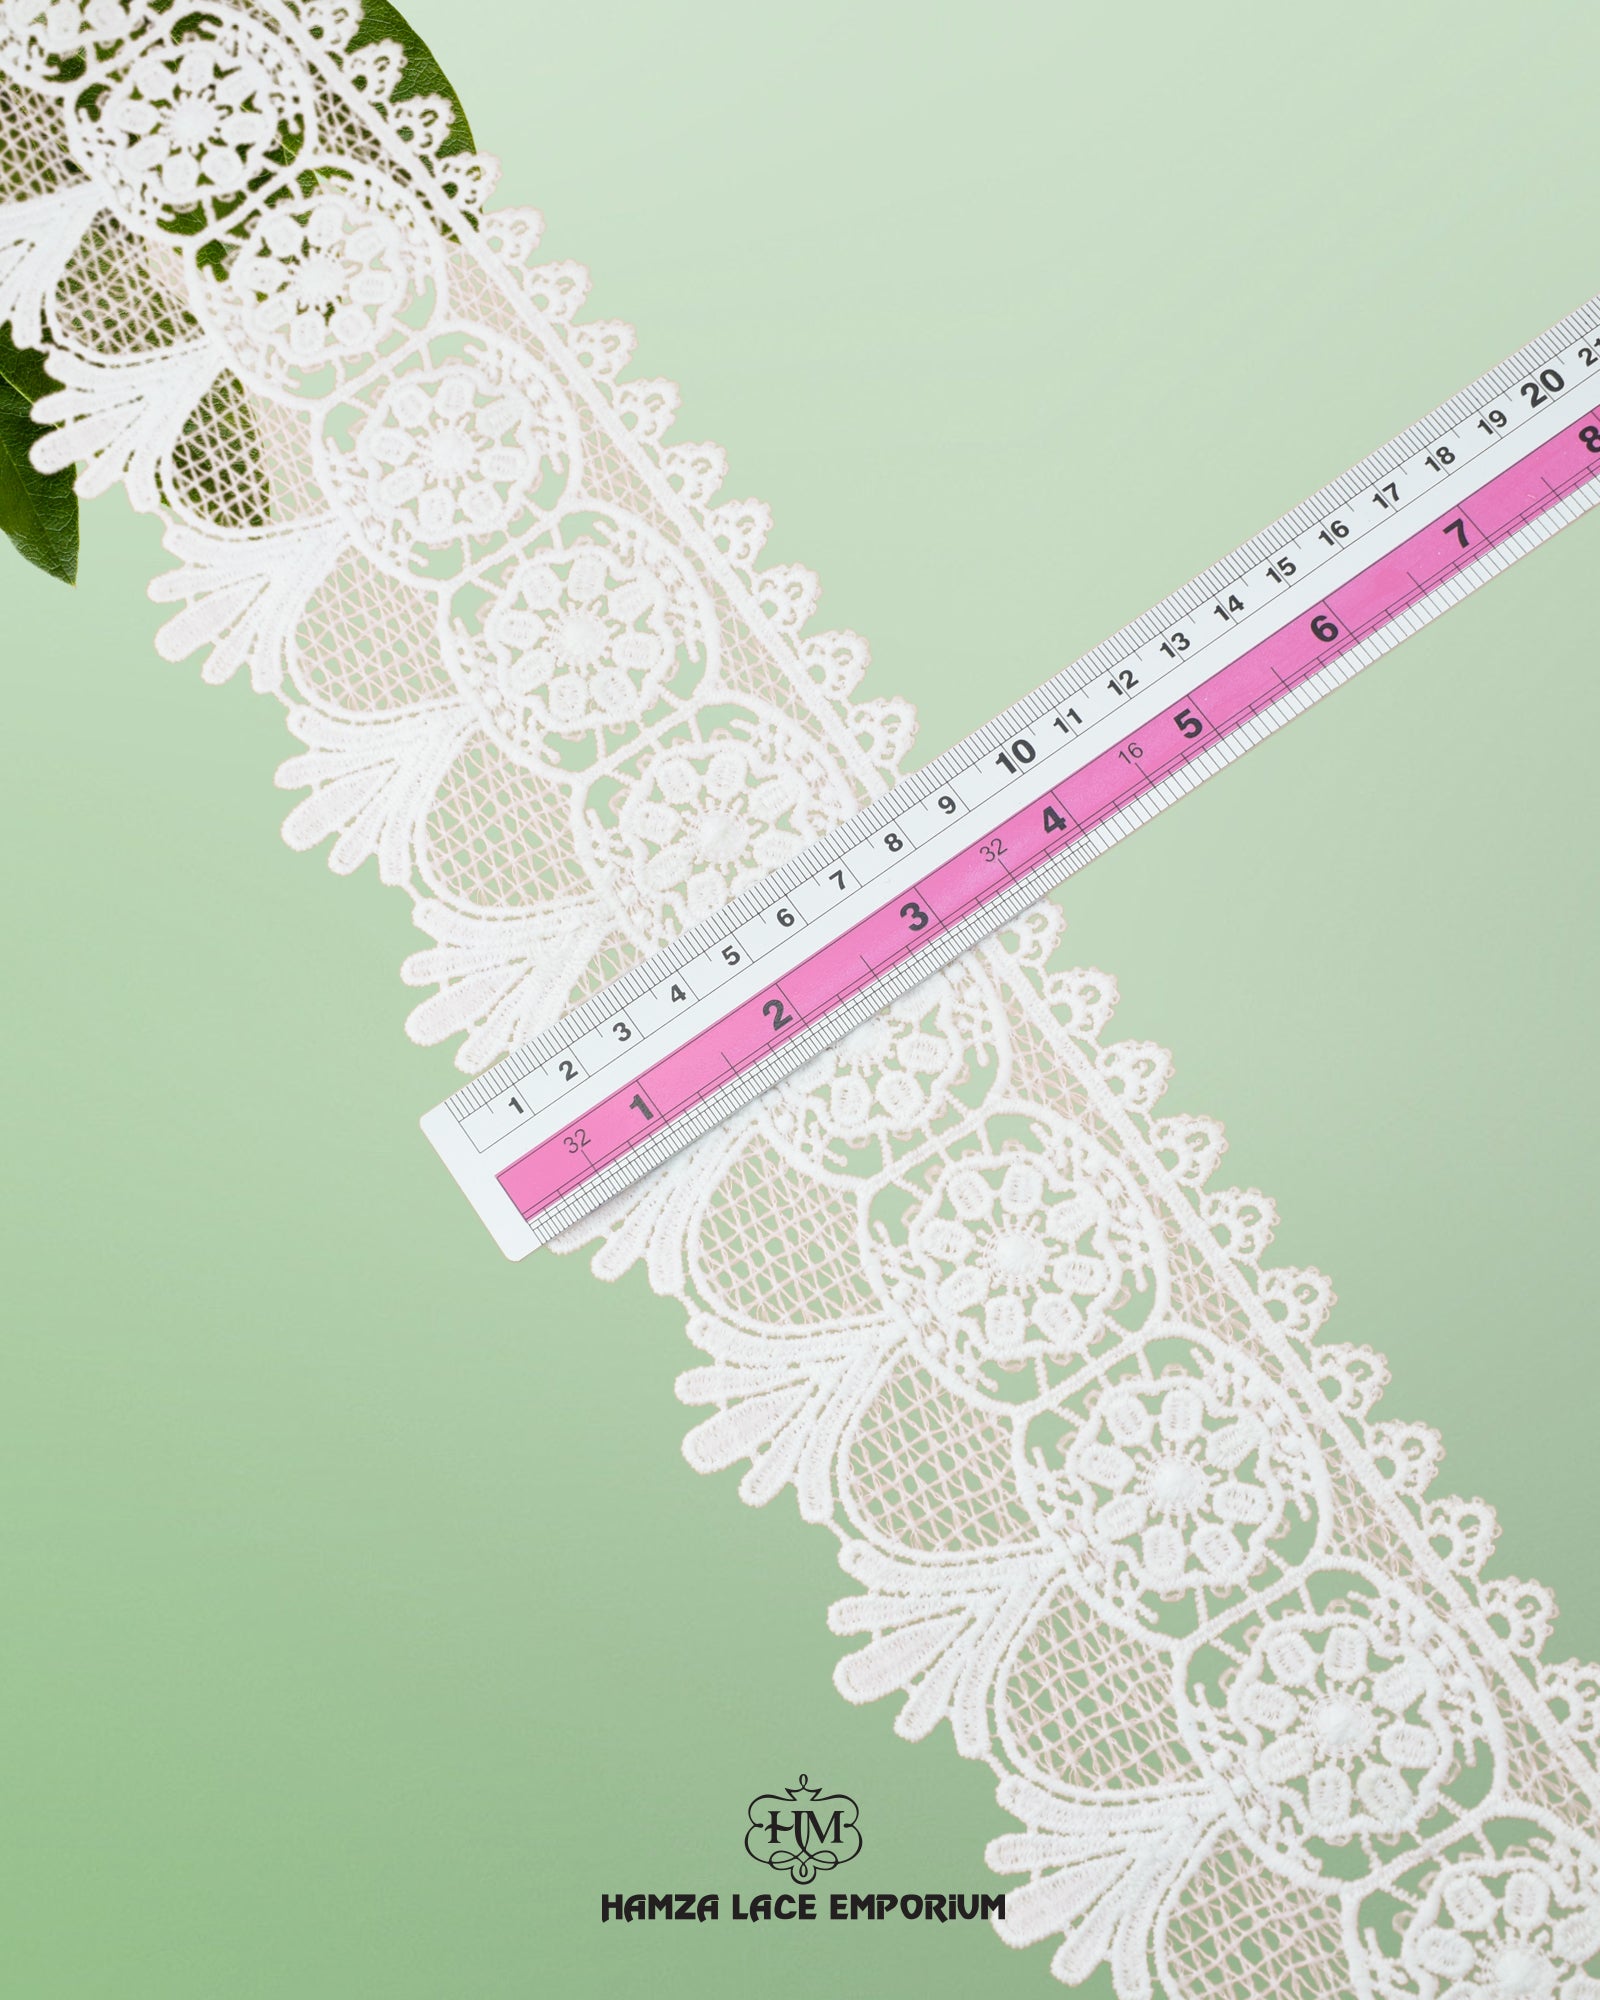 Using a scale, the size of 'Edging Lace 23580' is shown